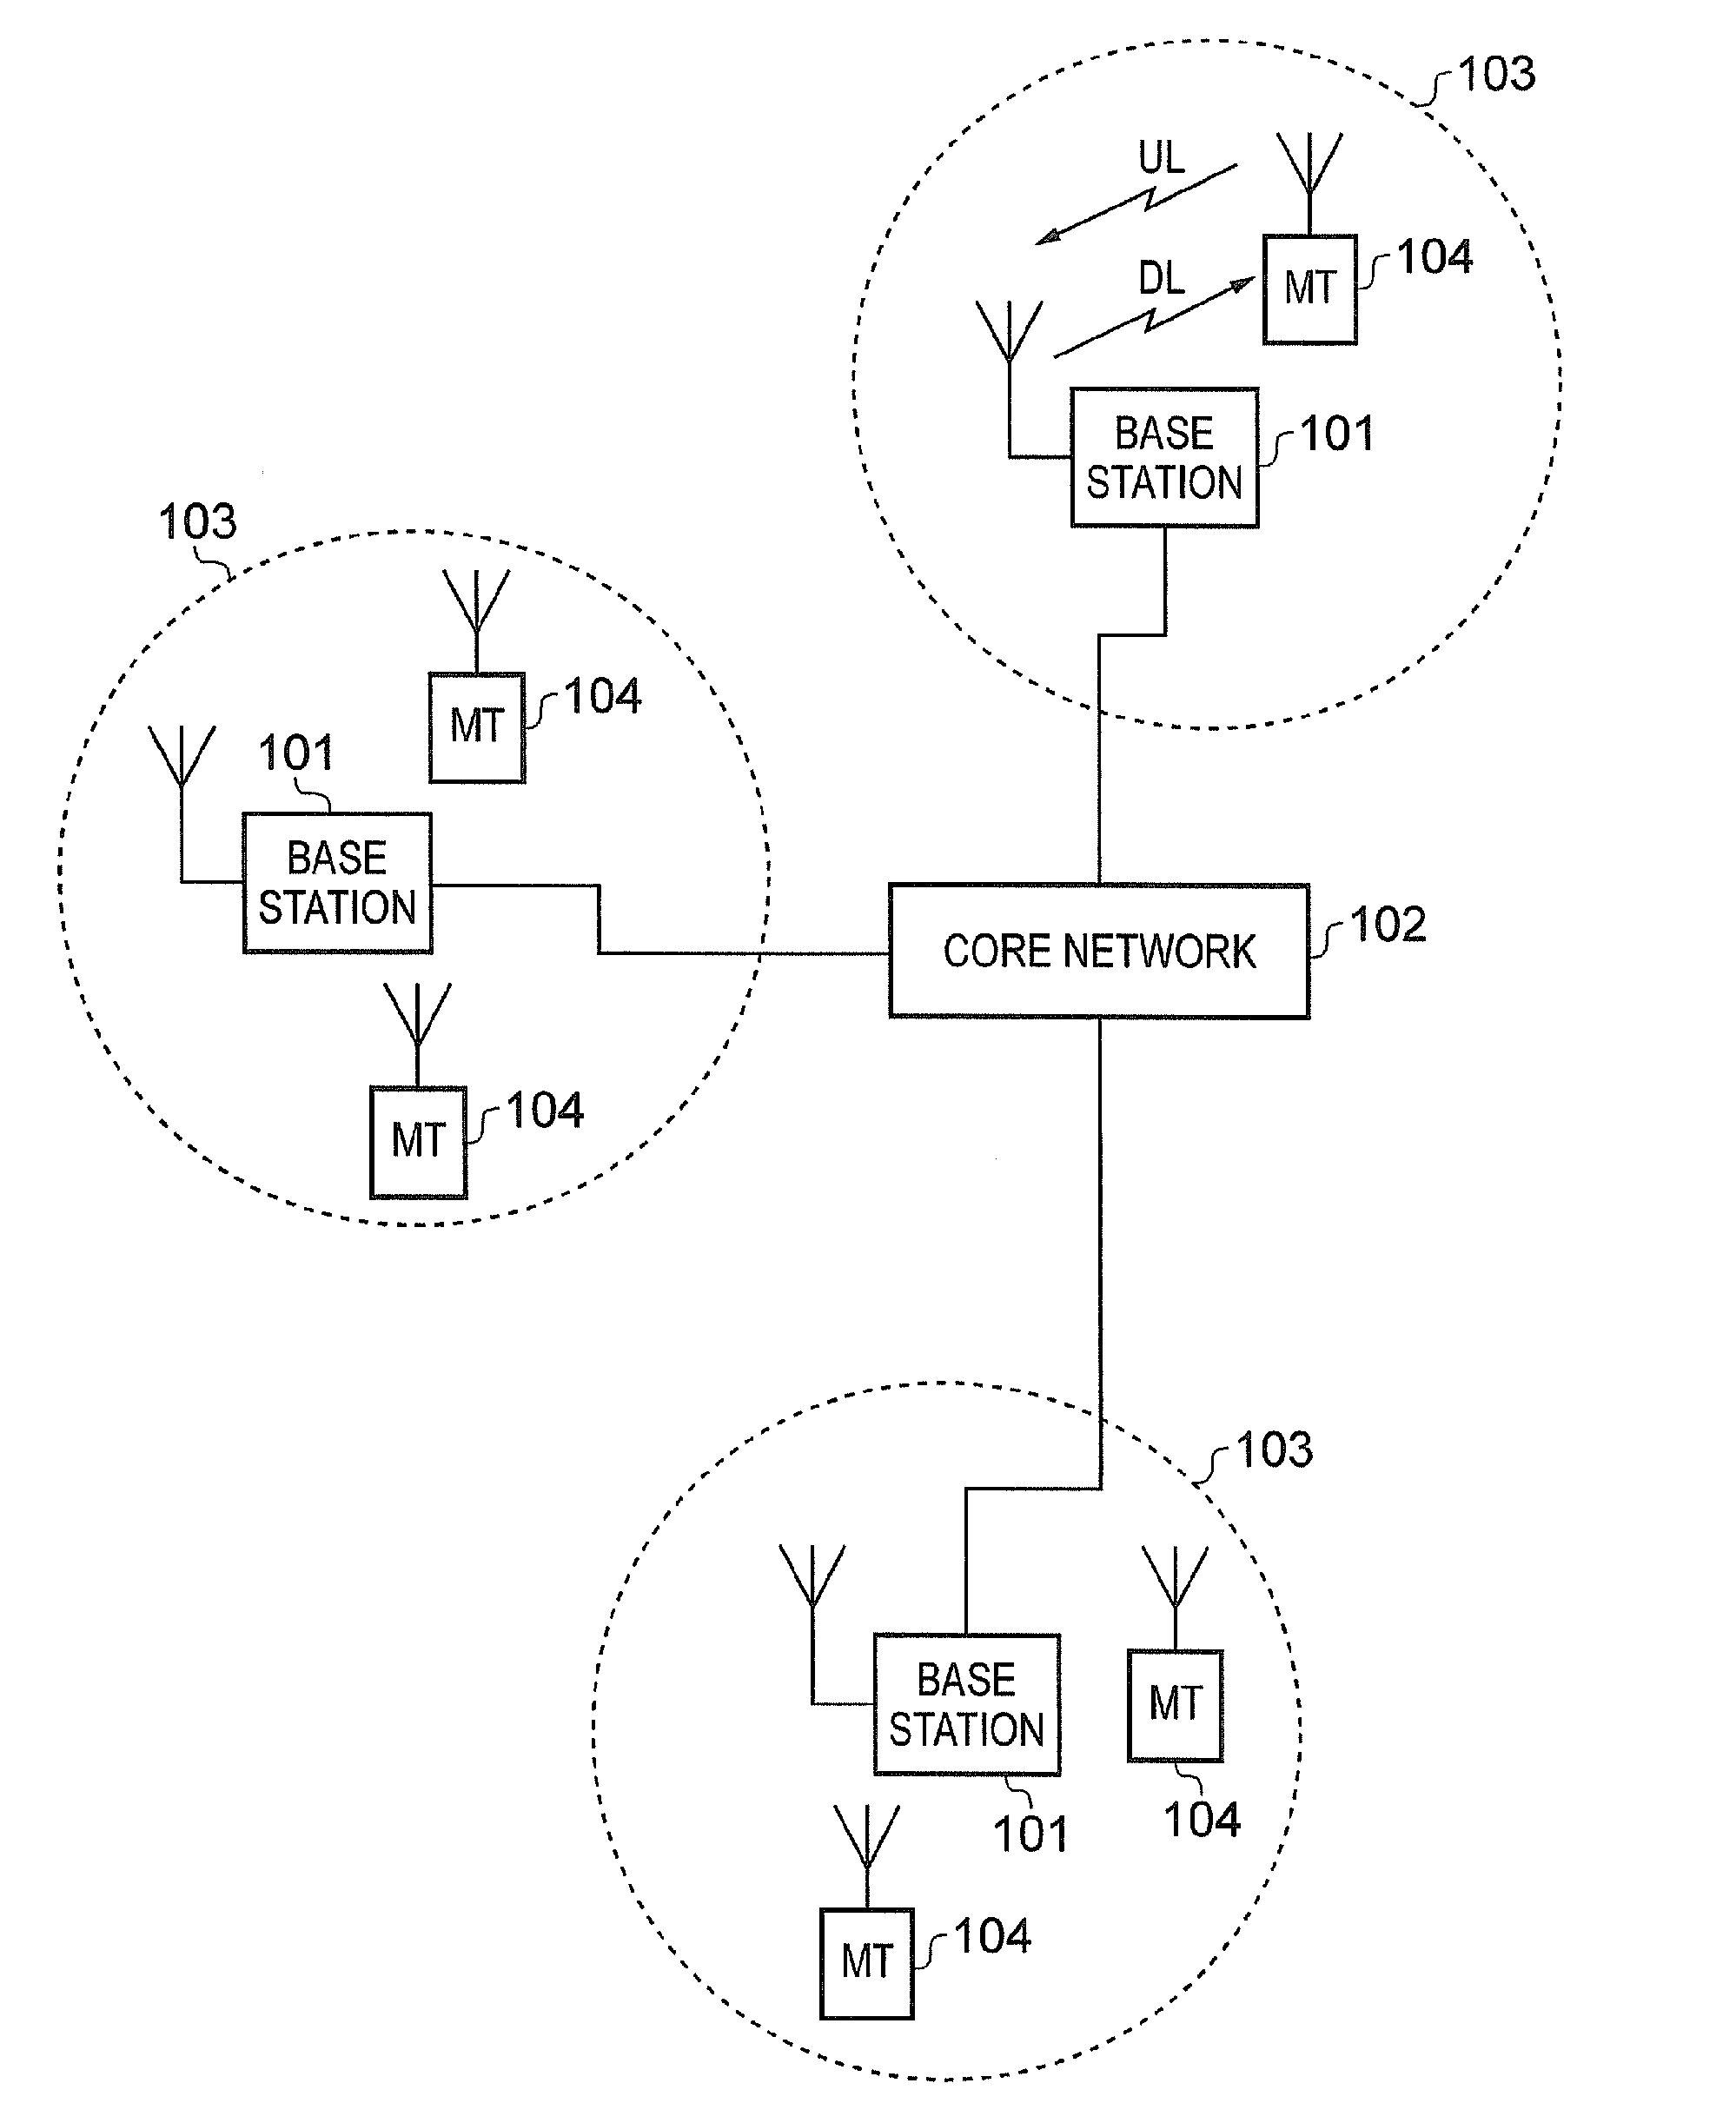 Inserting virtual carrier in conventional OFDM host carrier in communications system